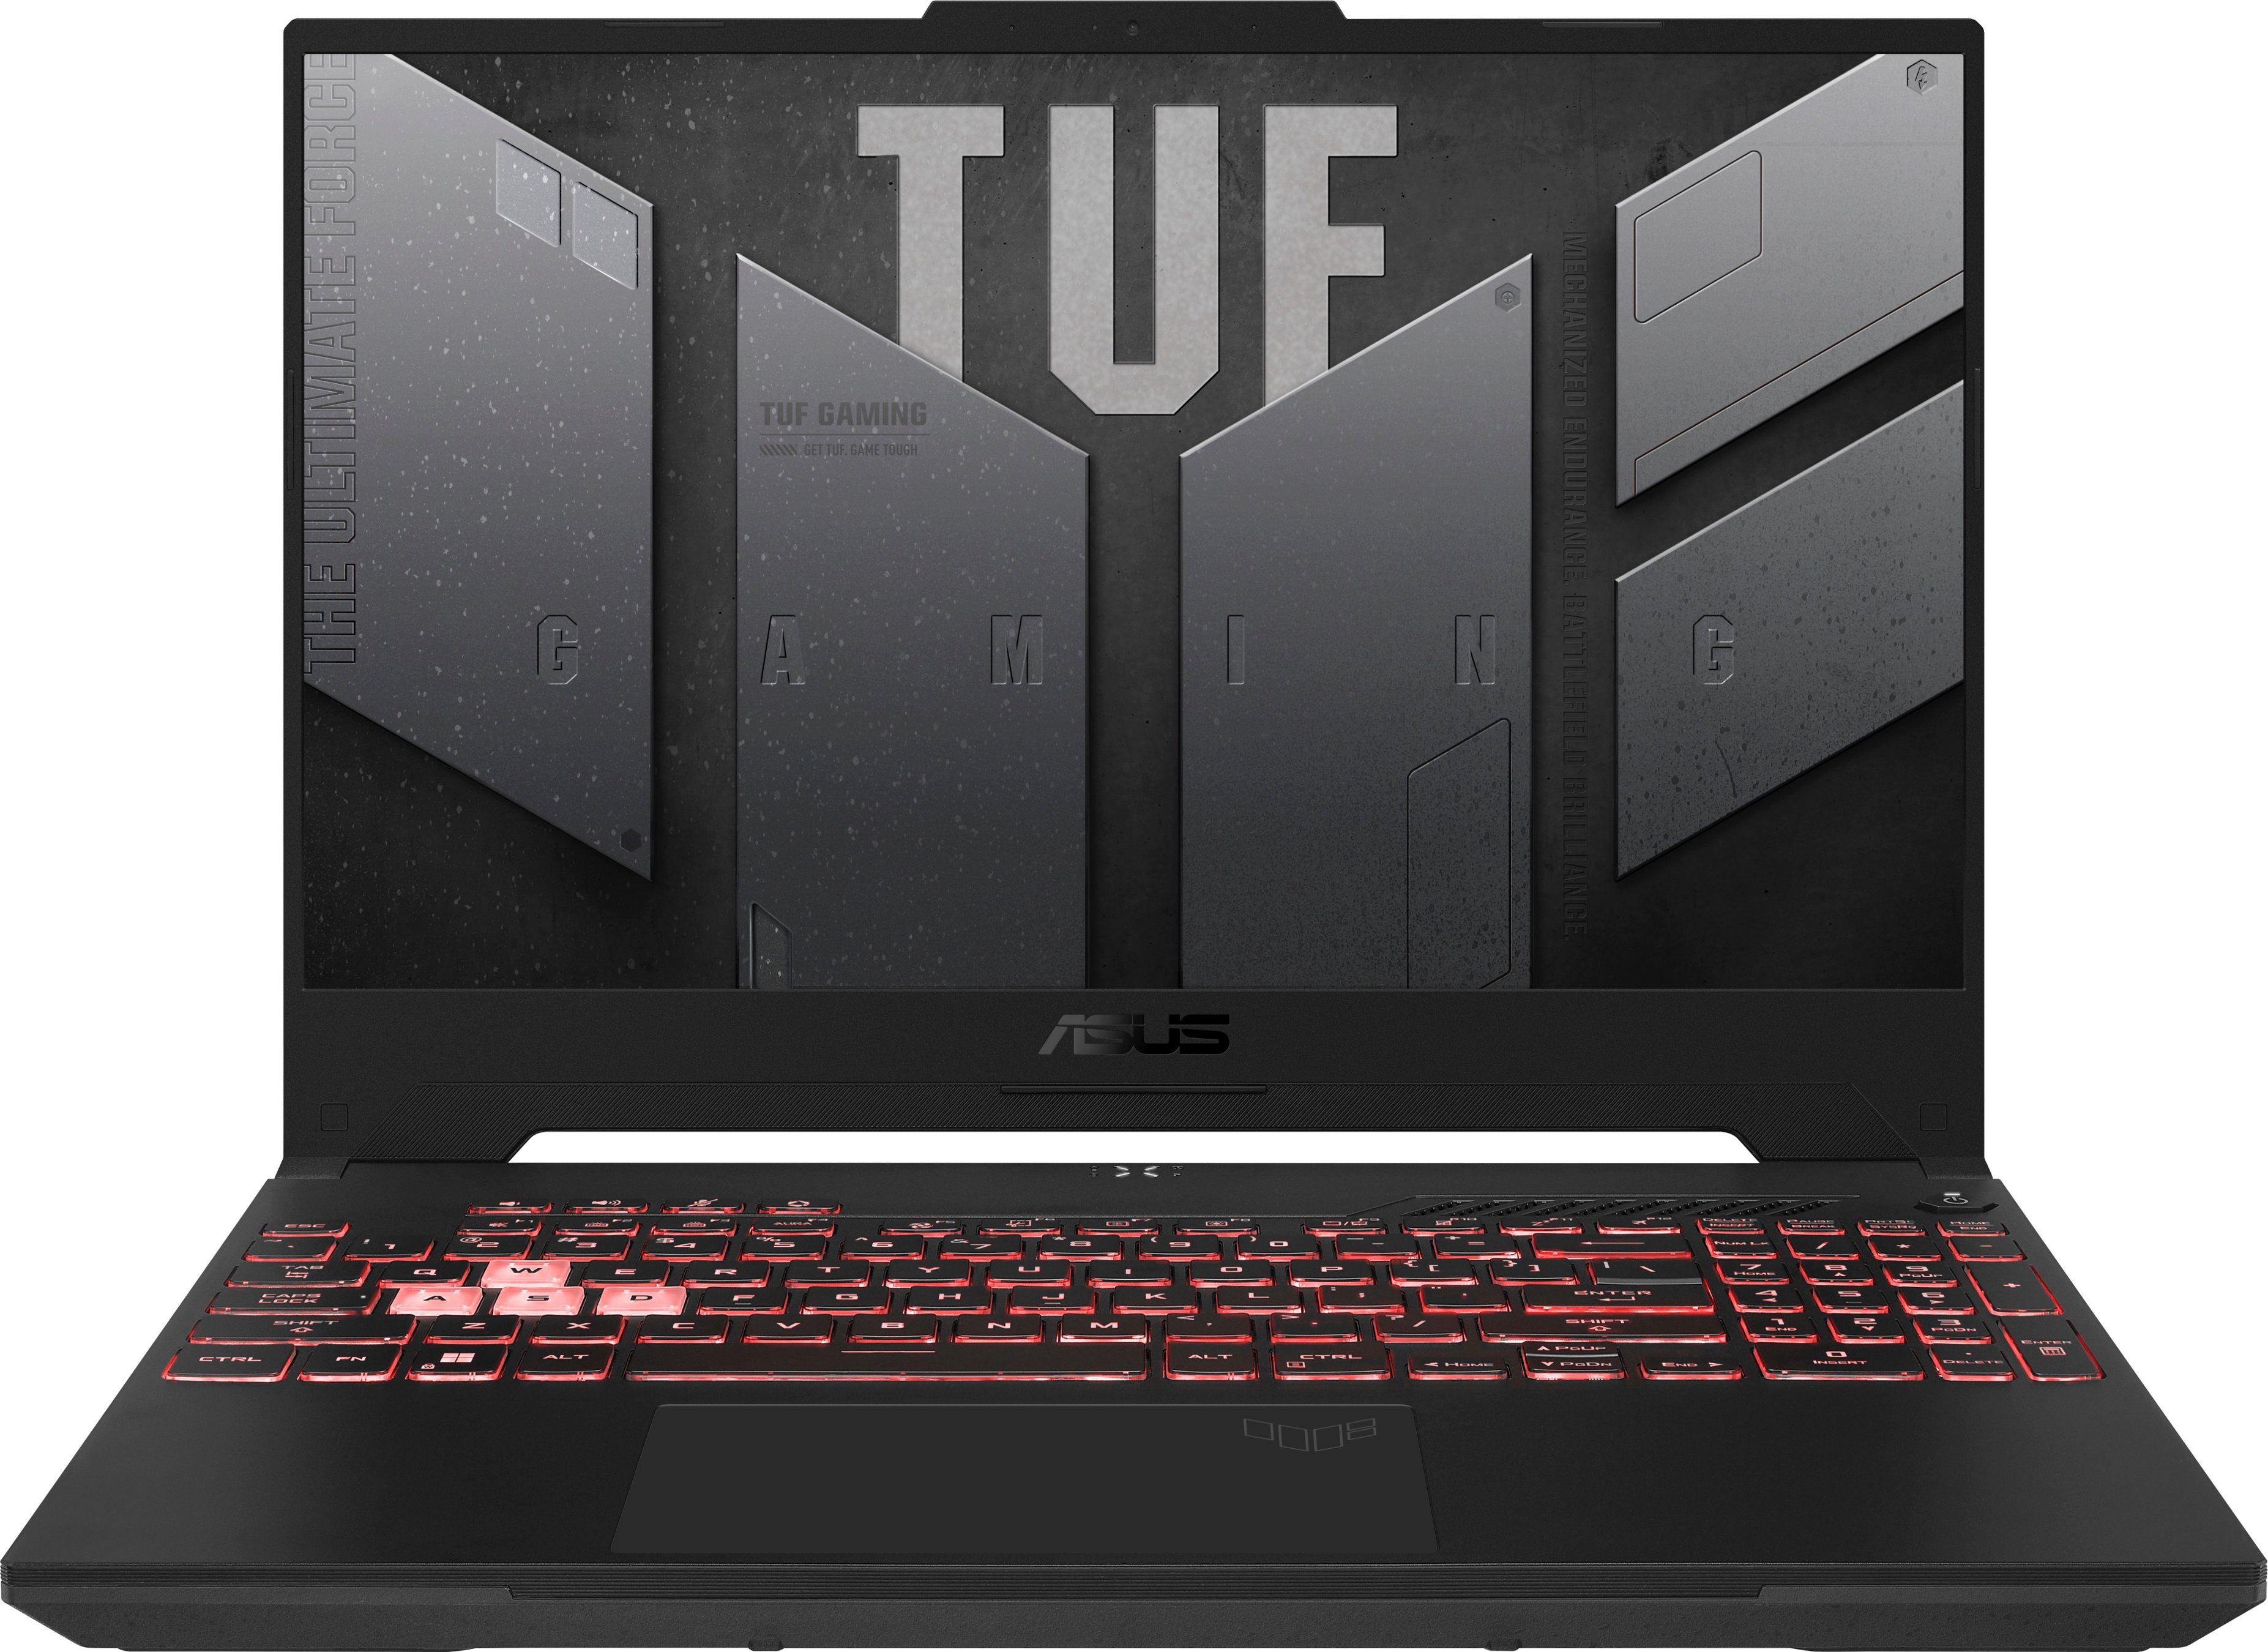 ASUS TUF Gaming 15.6" FHD 144Hz Gaming Laptop-AMD Ryzen 7-8GB DDR5 Memory-NVIDIA GeForce RTX 3050 Ti-512GB PCIe SSD FA507RE-A15.R73050T - Best Buy